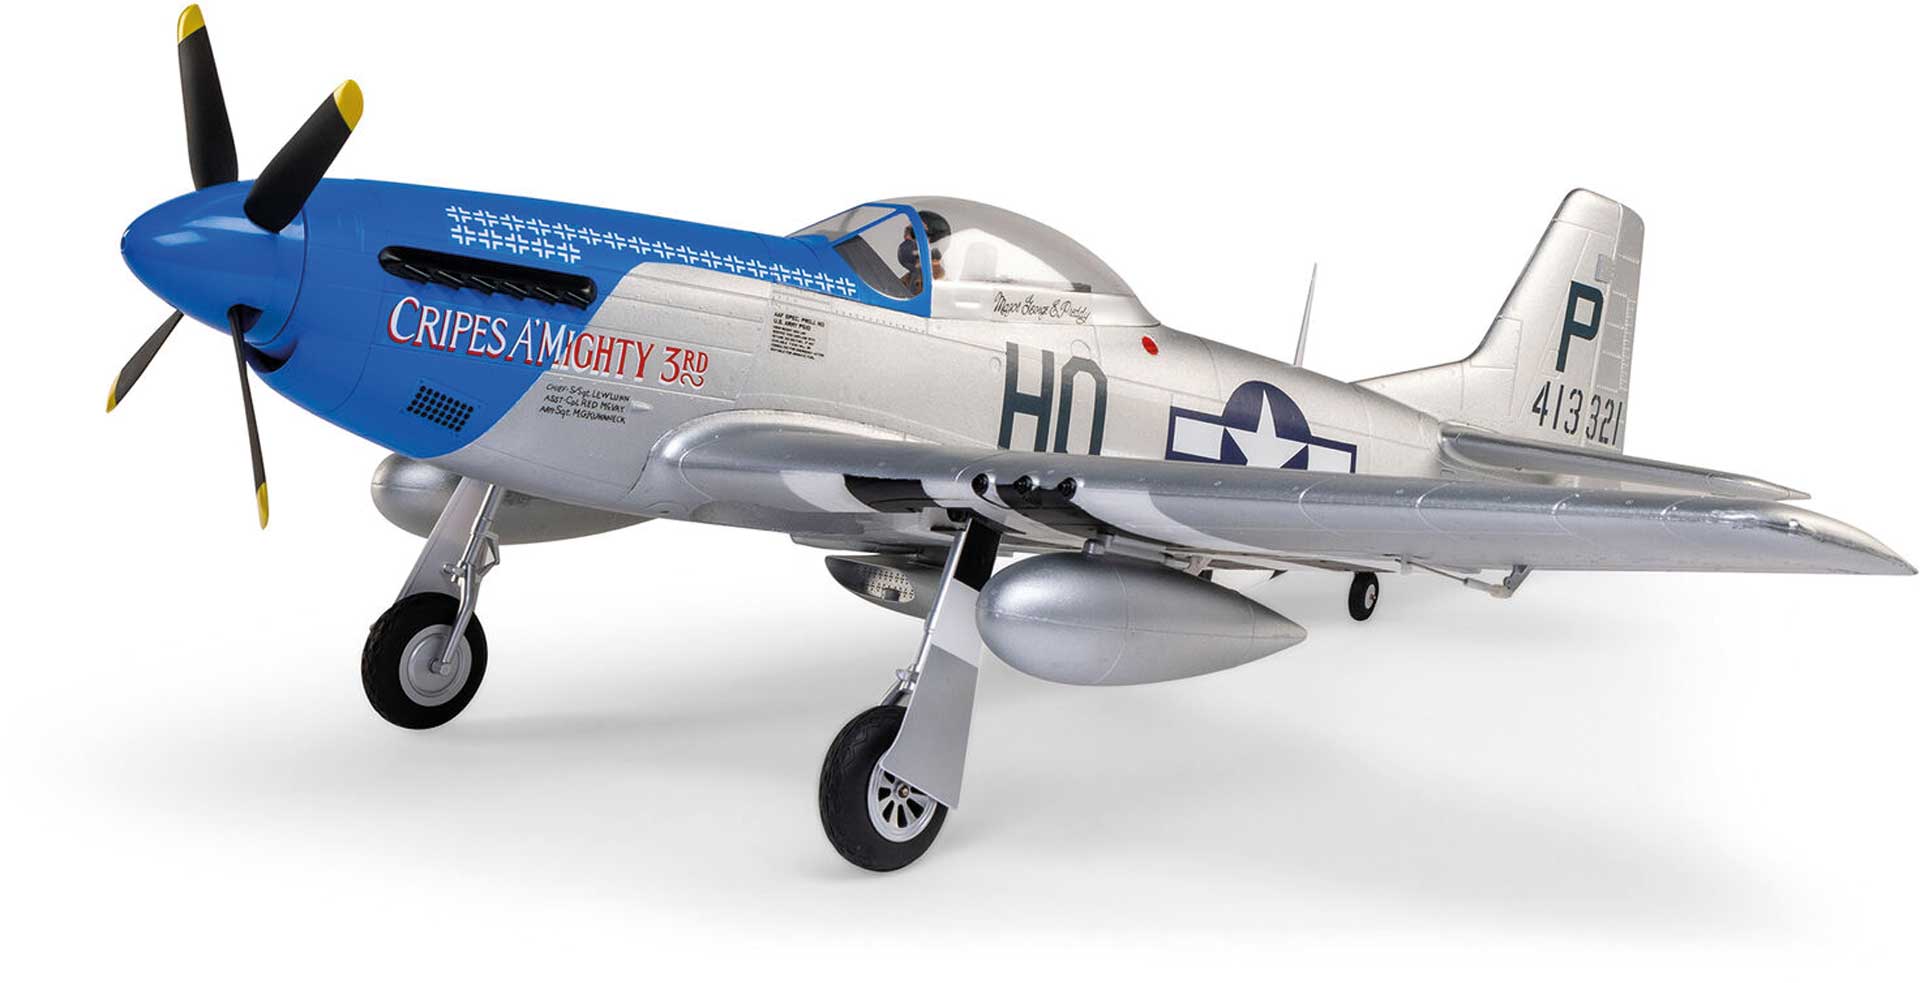 E-FLITE P-51D Mustang 1.2m BNF Basic with AS3X und SAFE Select Cripes A’Mighty 3rd